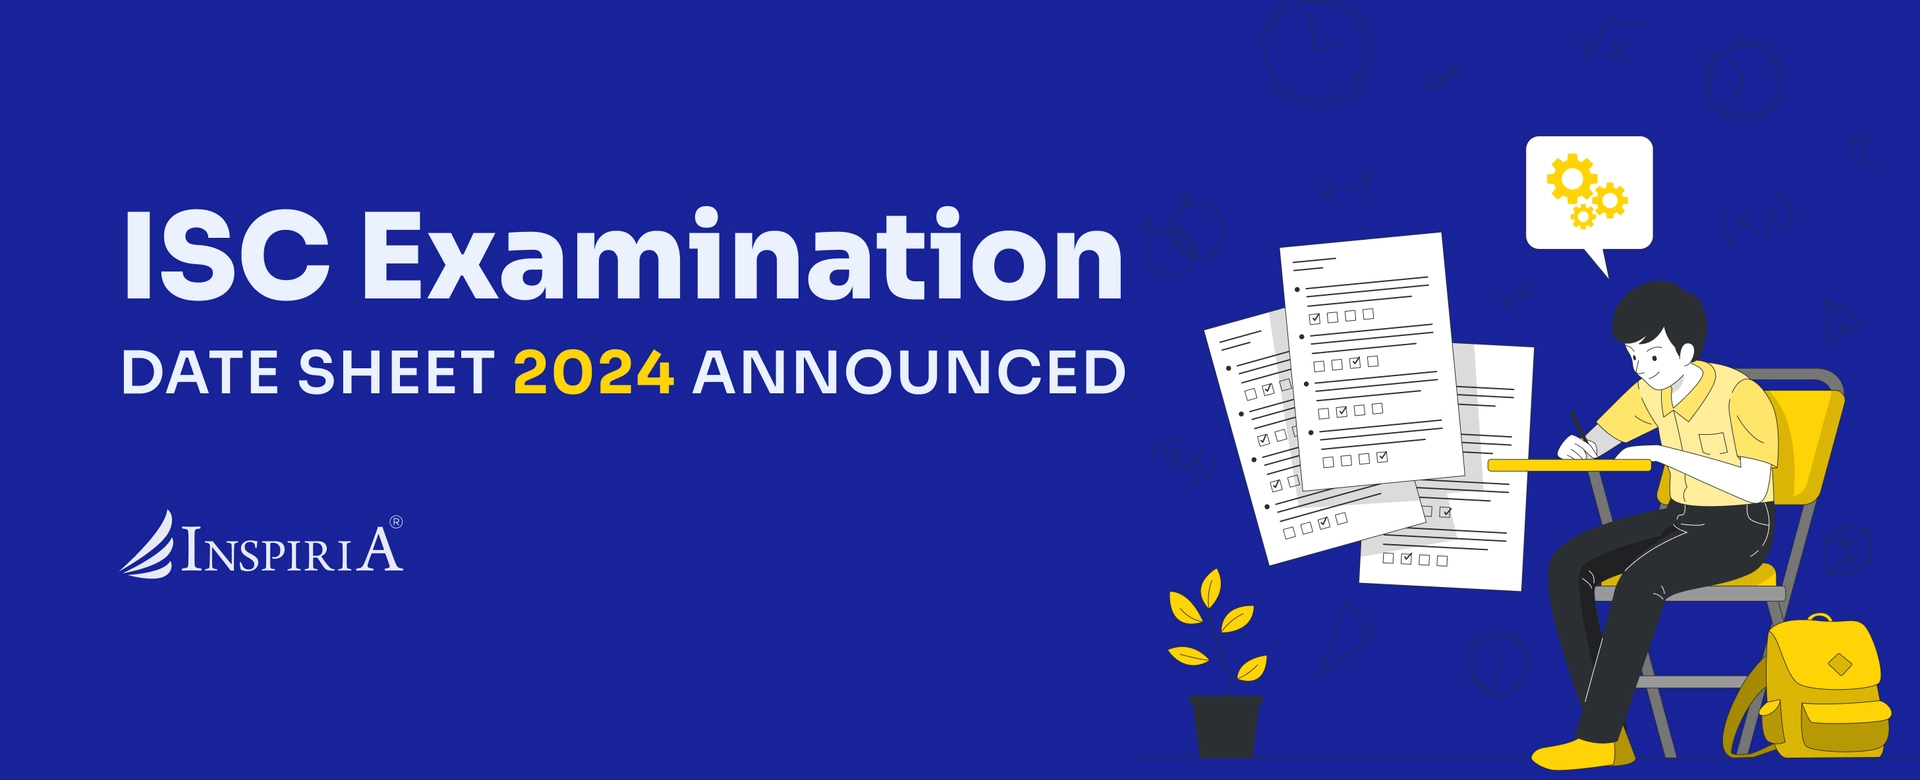 ISC Examination Date Sheet 2024 Announced